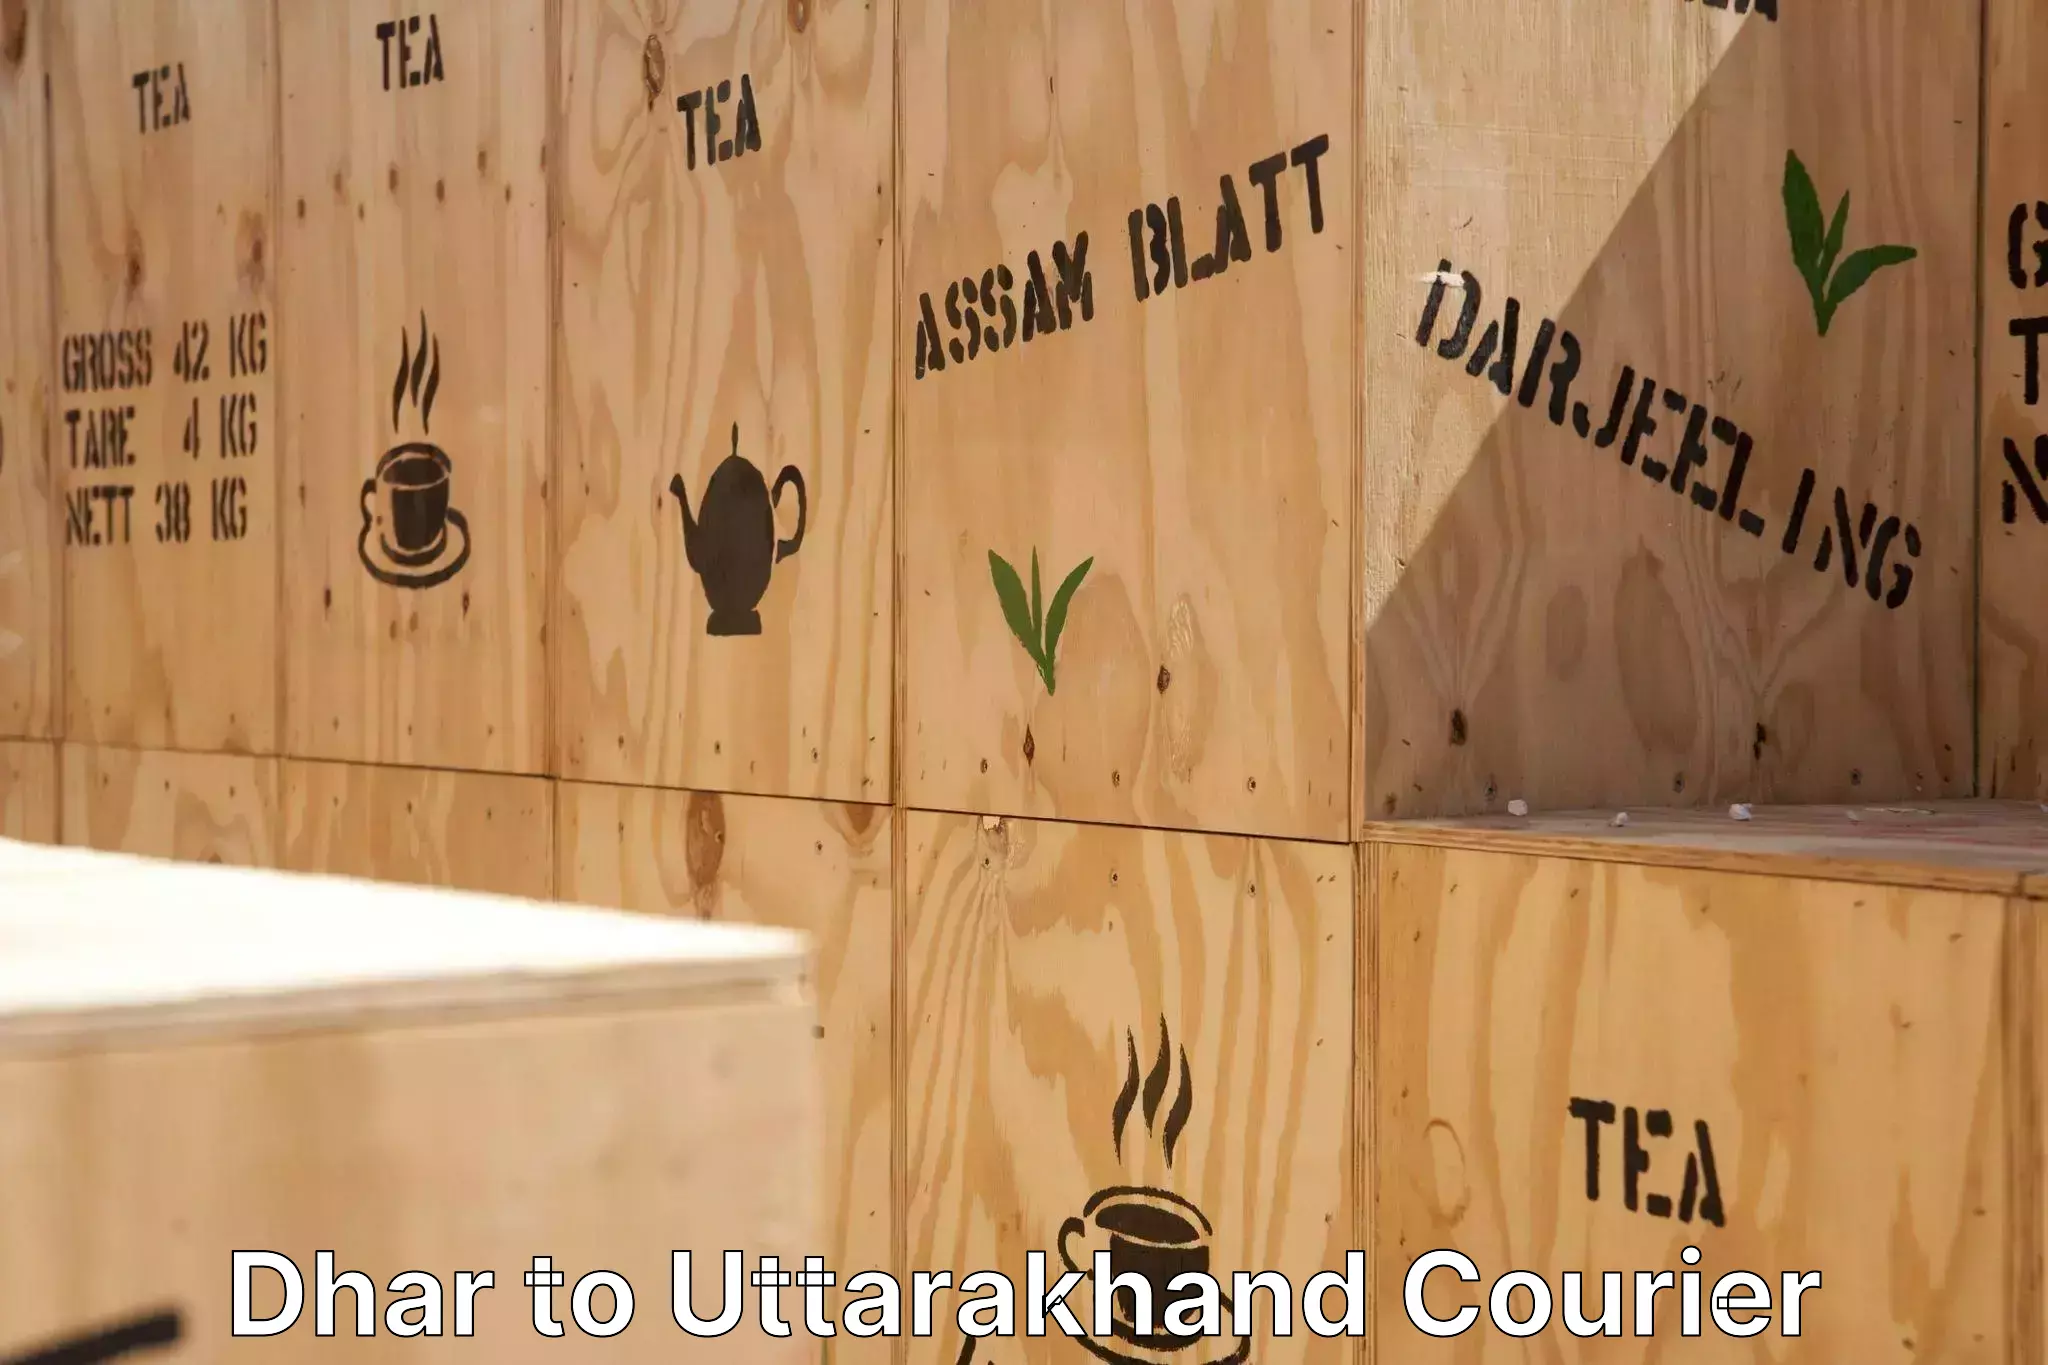 Furniture delivery service Dhar to Almora